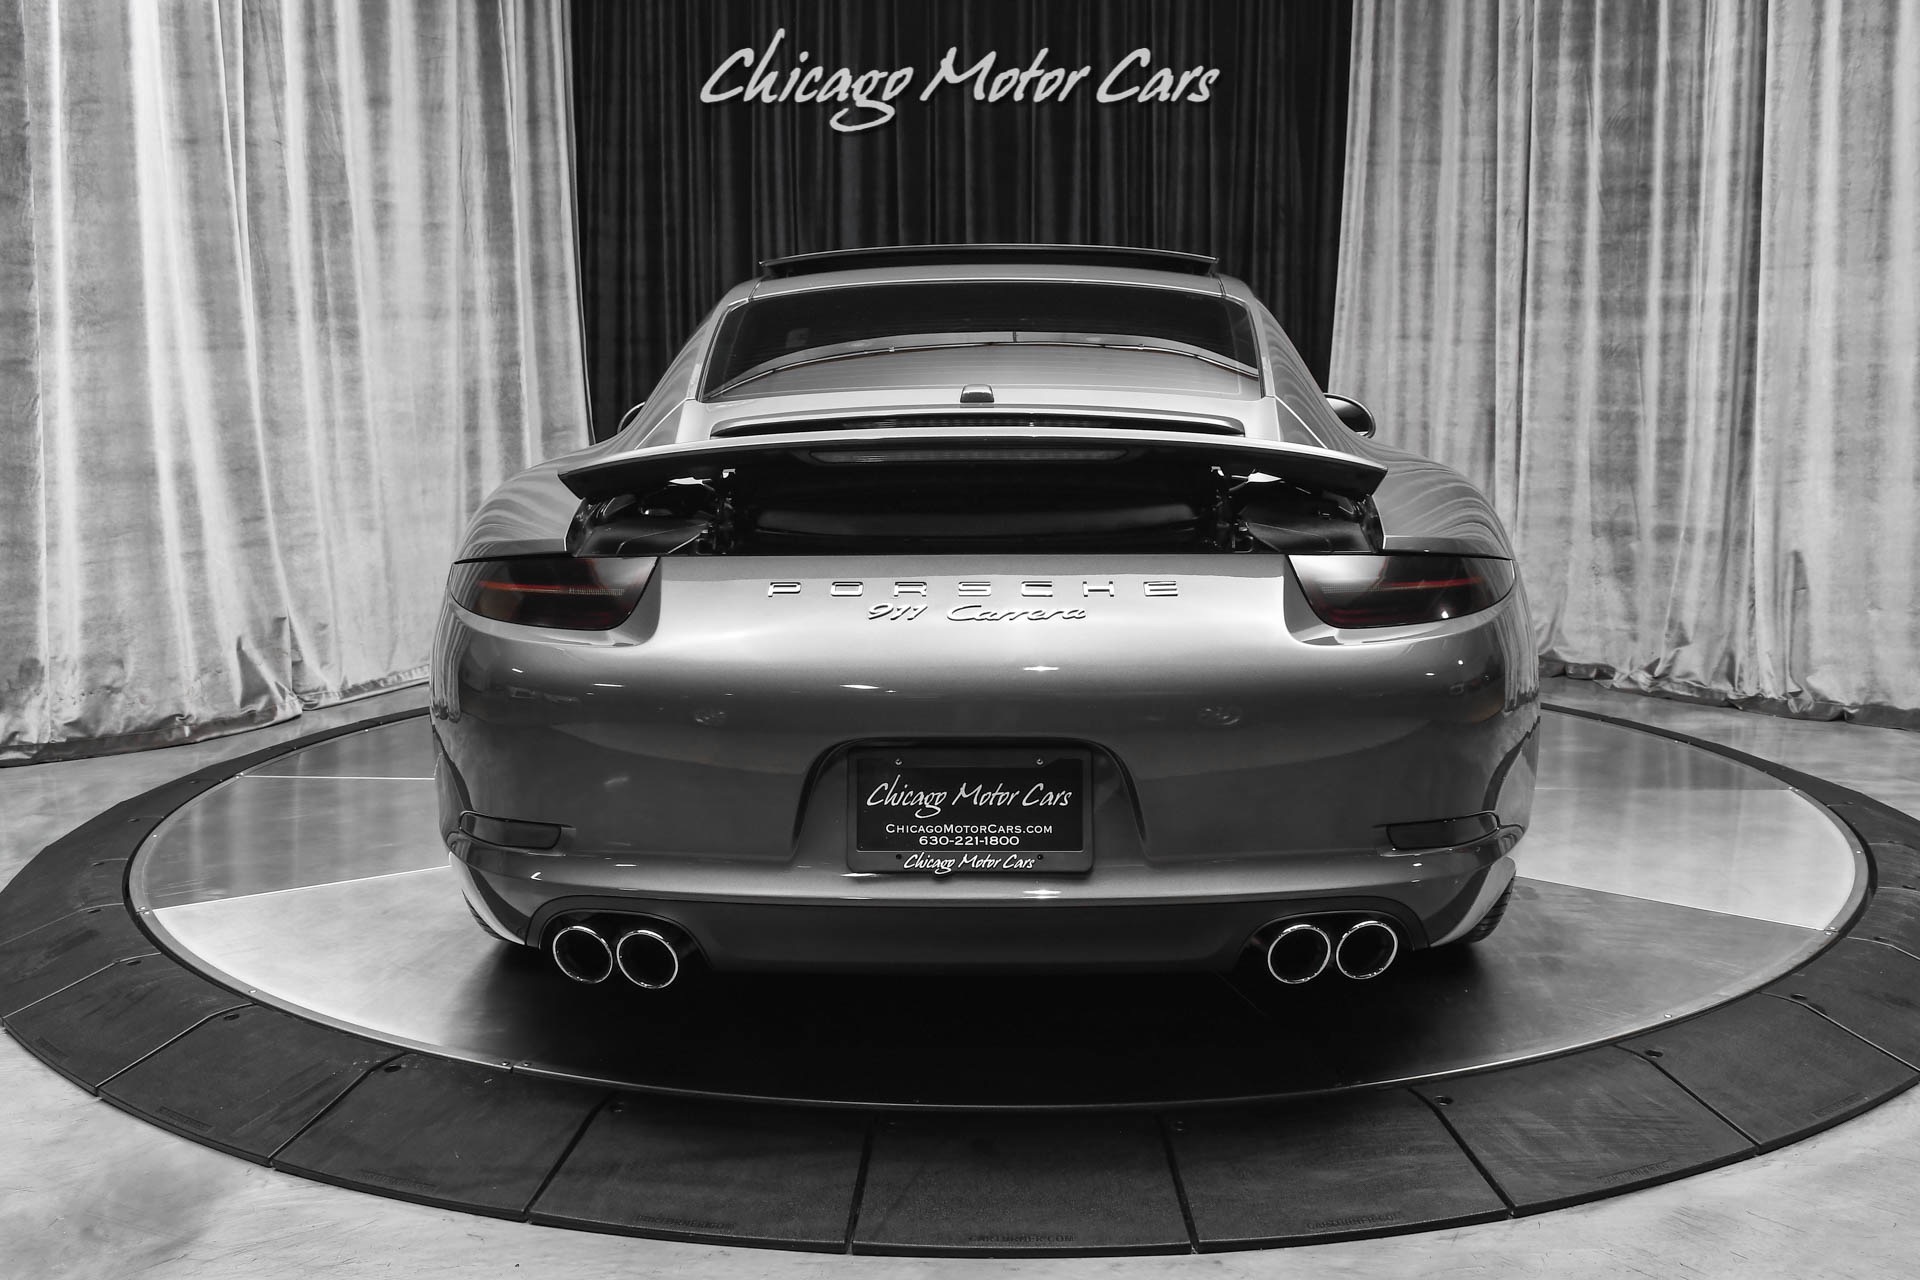 Used-2013-Porsche-911-Carrera-Coupe-Agate-Grey-Metallic-PDLS--Sport-Chrono-Package-LOADED